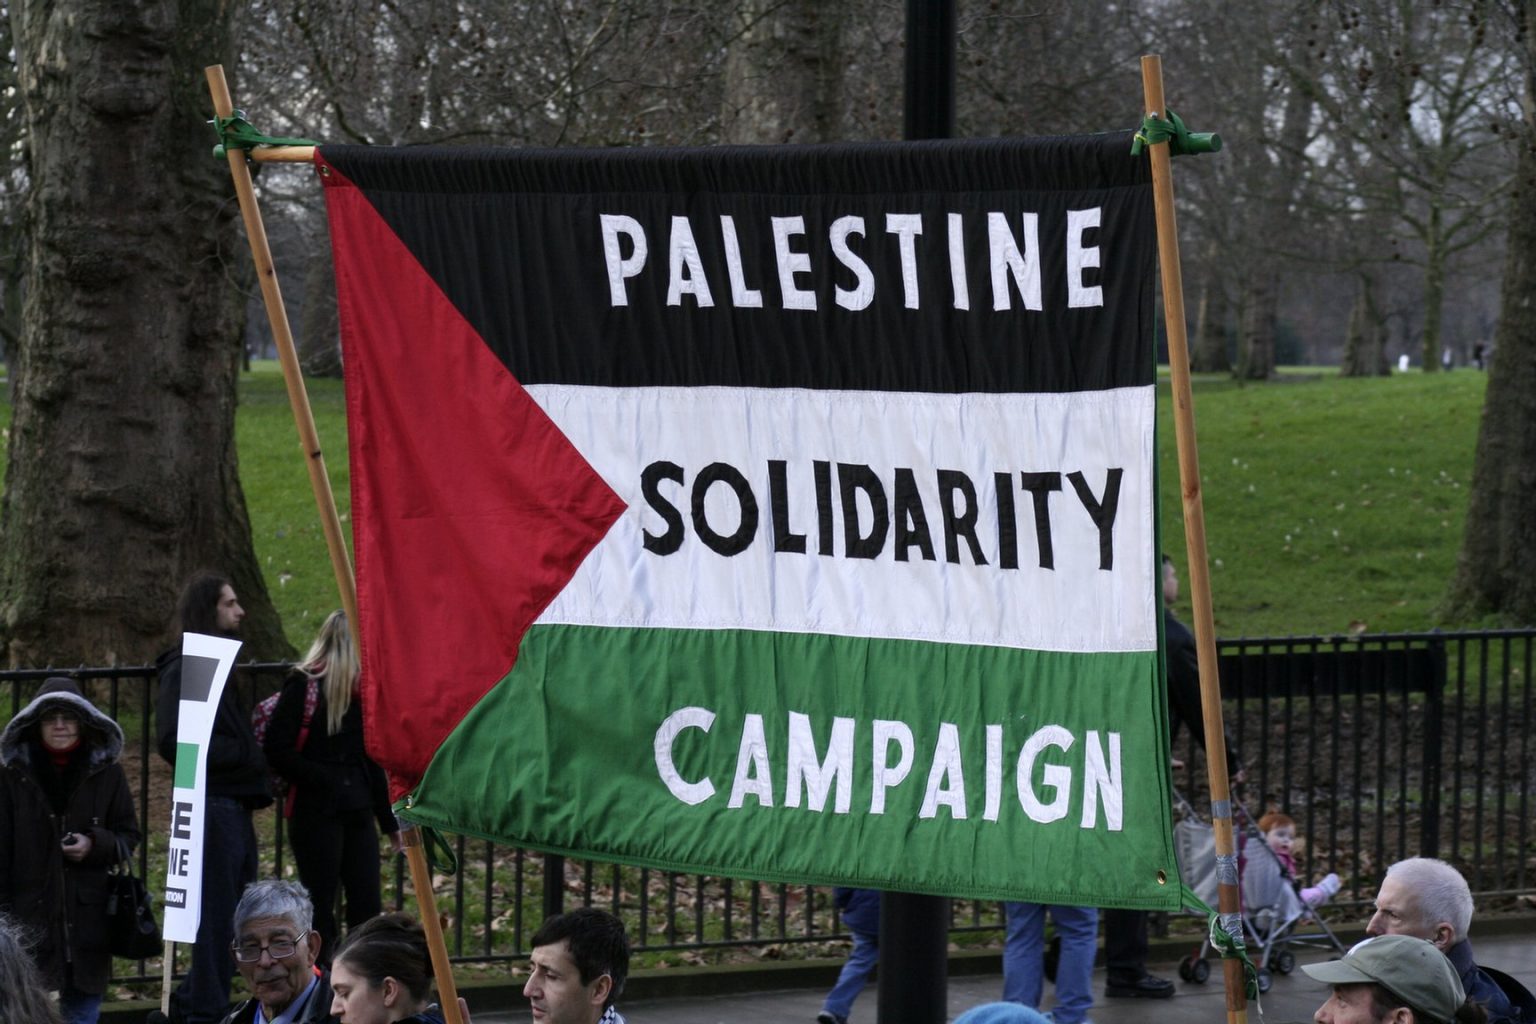 Palestine Solidarity Campaign Liverpool Friends of Palestine